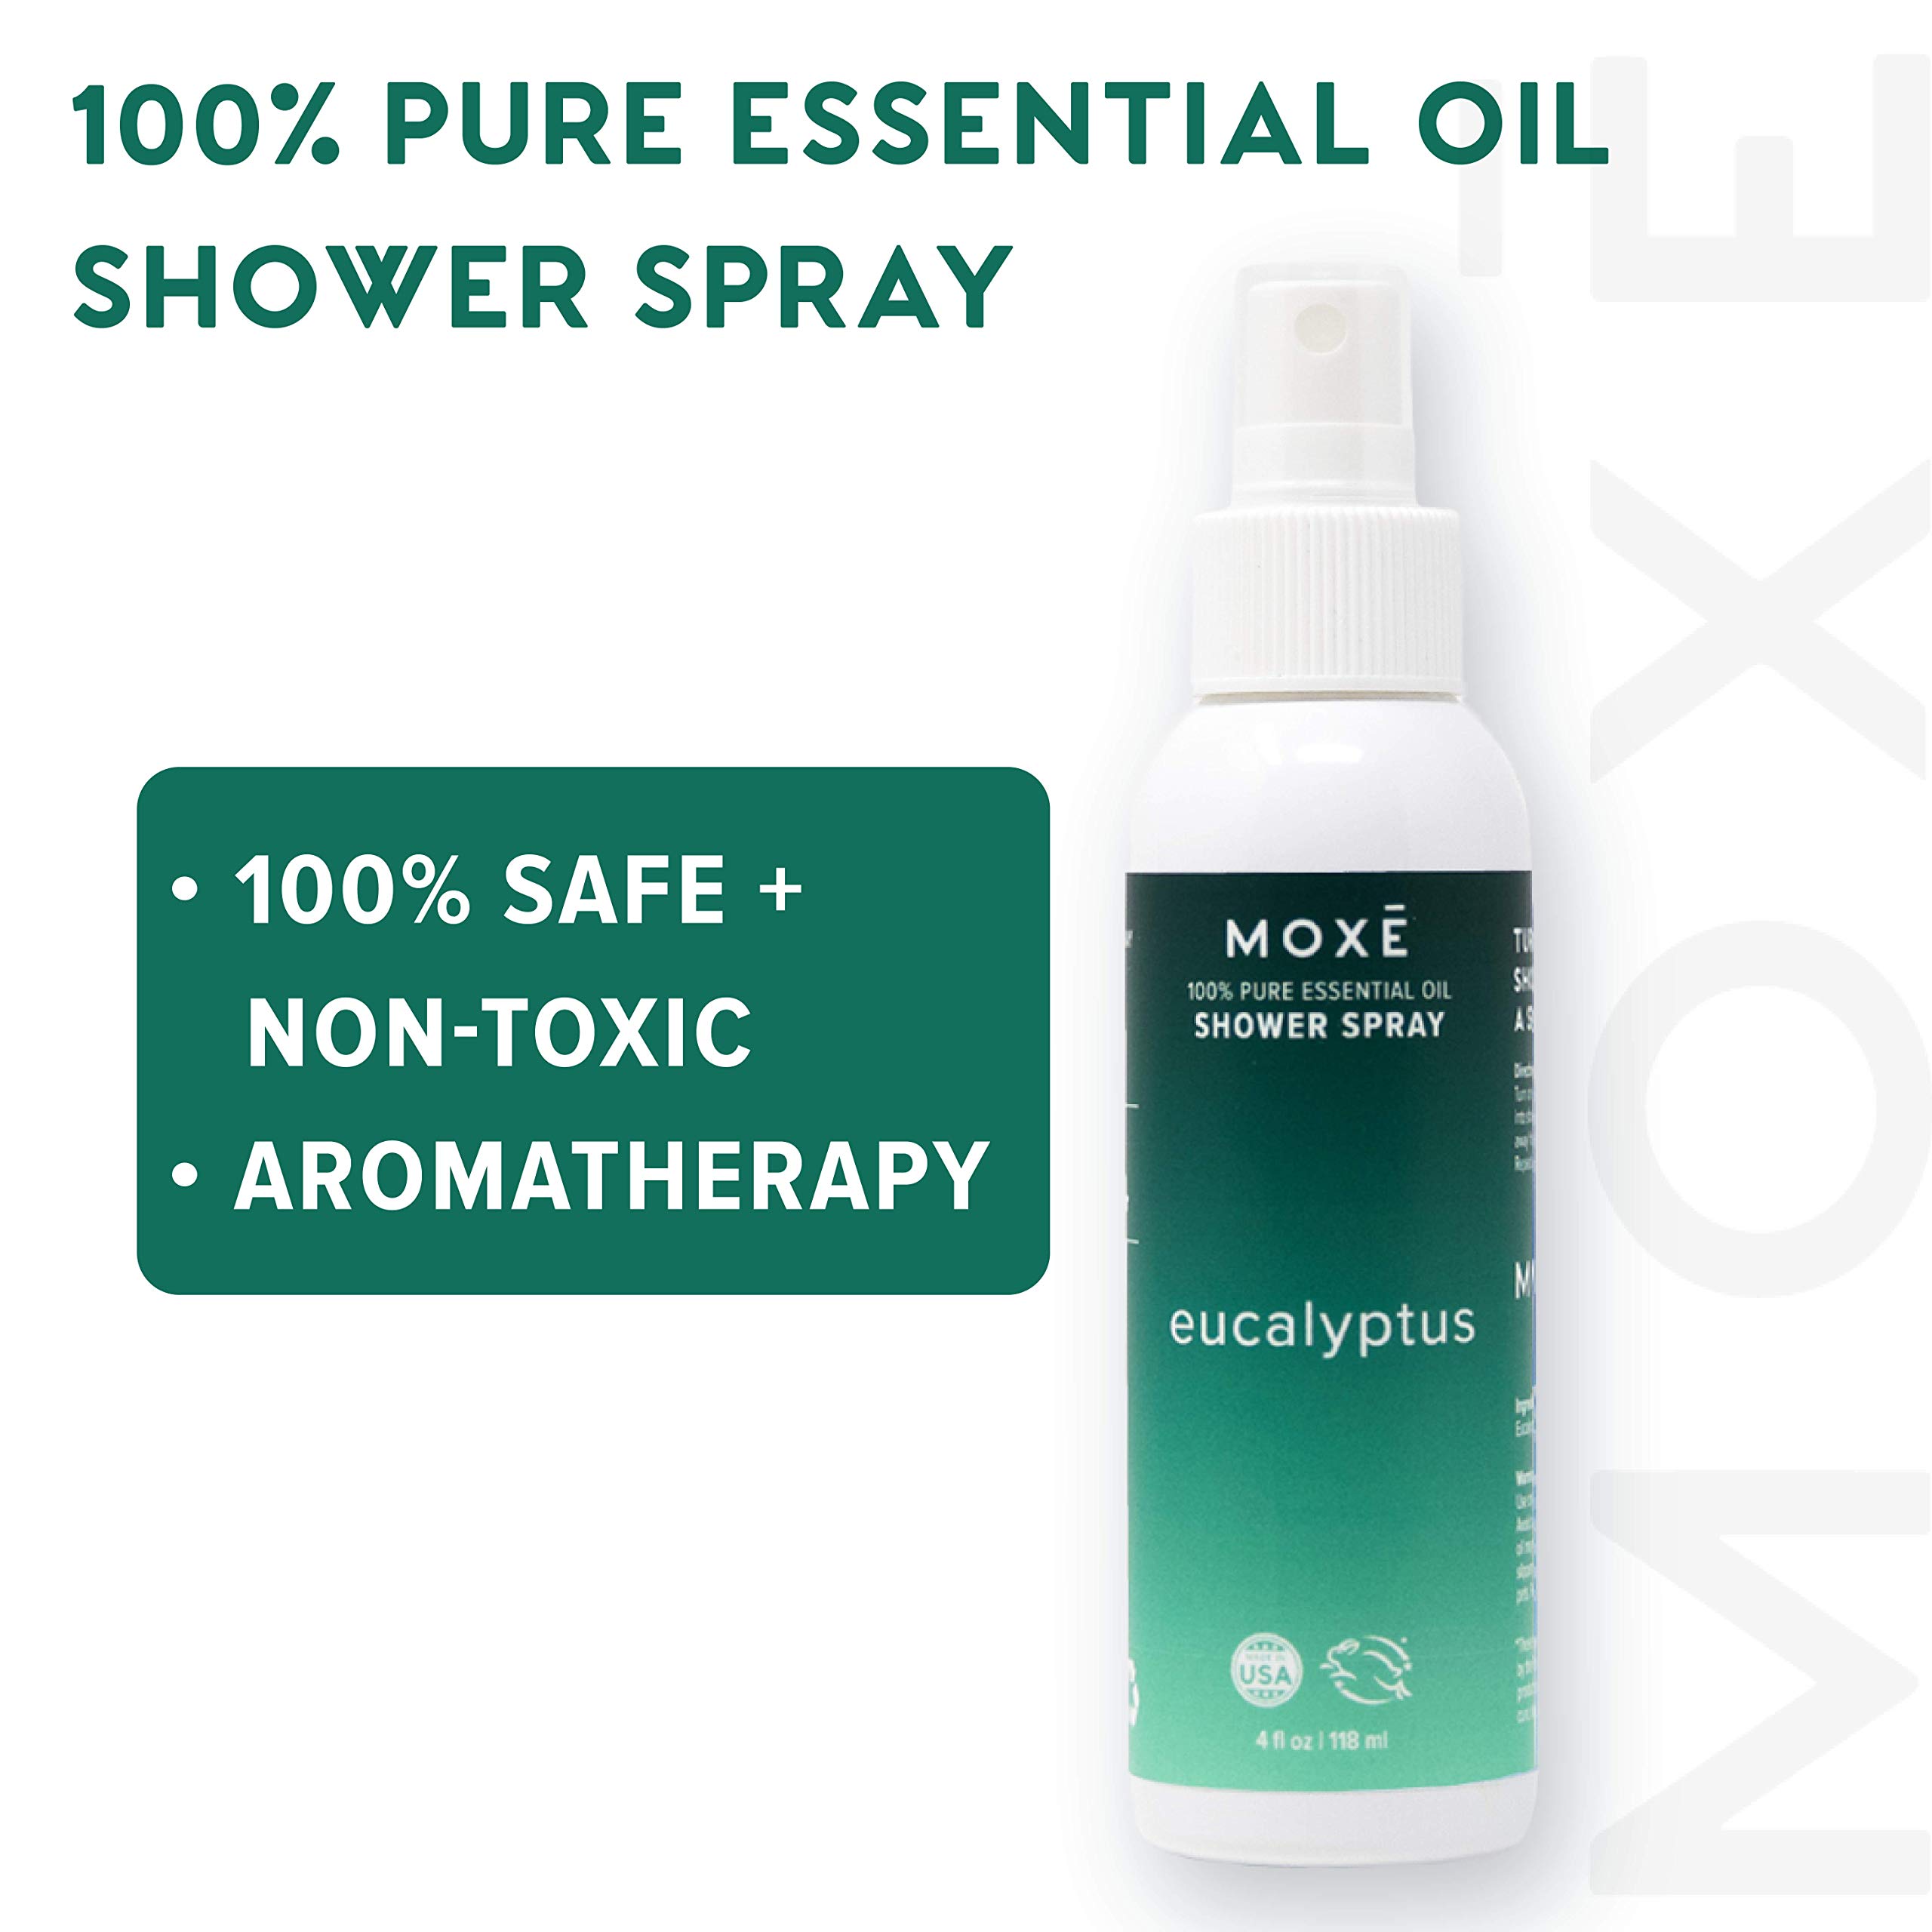 MOXE Eucalyptus Oil Shower Mist, Spa Steam Spray, Certified Natural 100% Essential Oils, Made in USA, Aromatherapy, Sinus Congestion Relief, Tension Relief, 4 Ounces